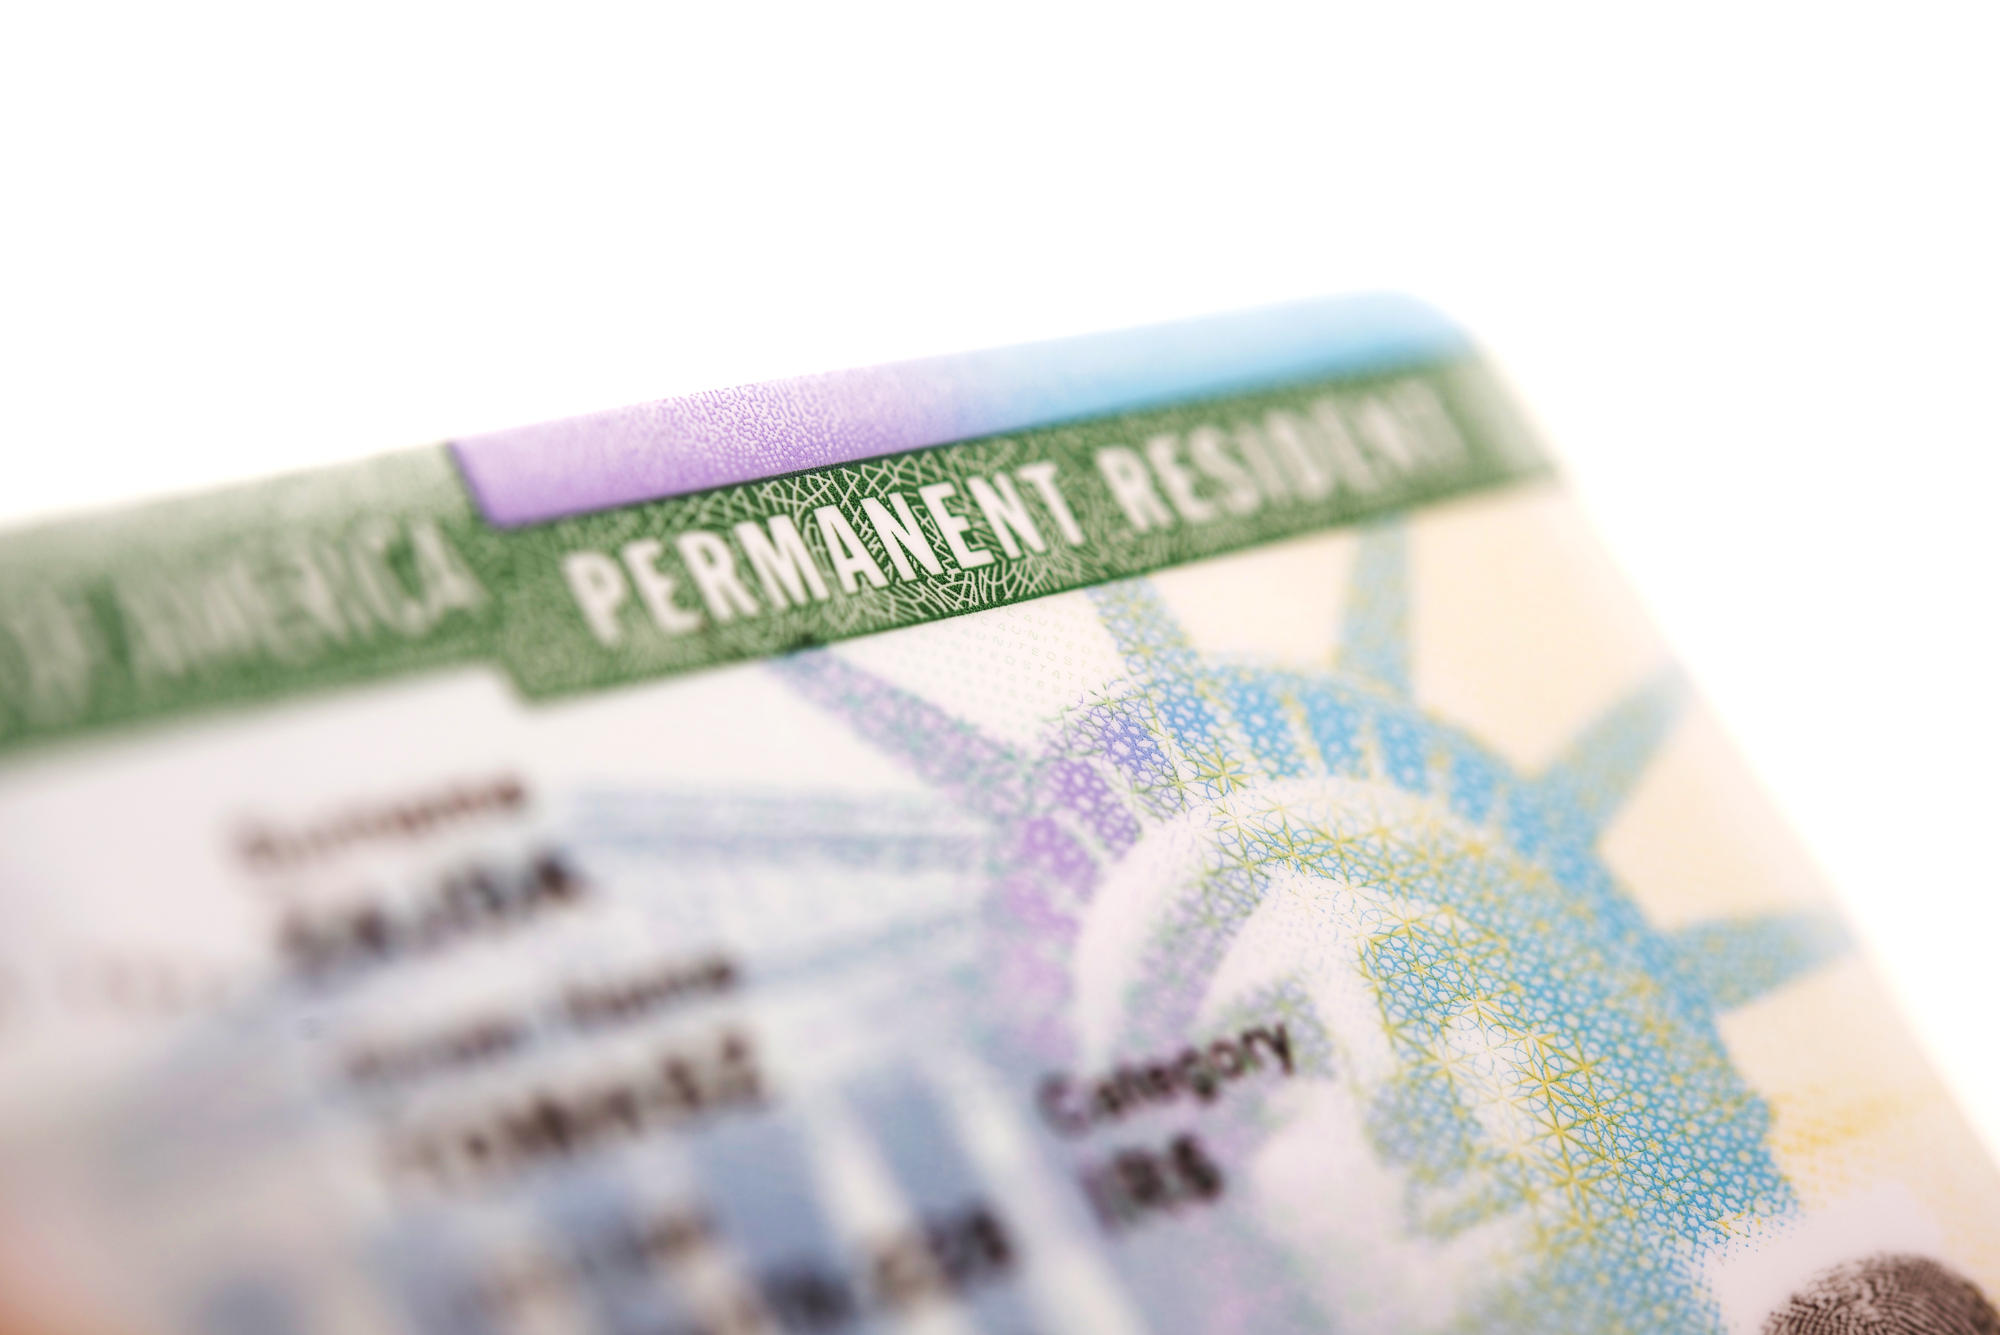 How much does it cost to hire an attorney to get a green card?